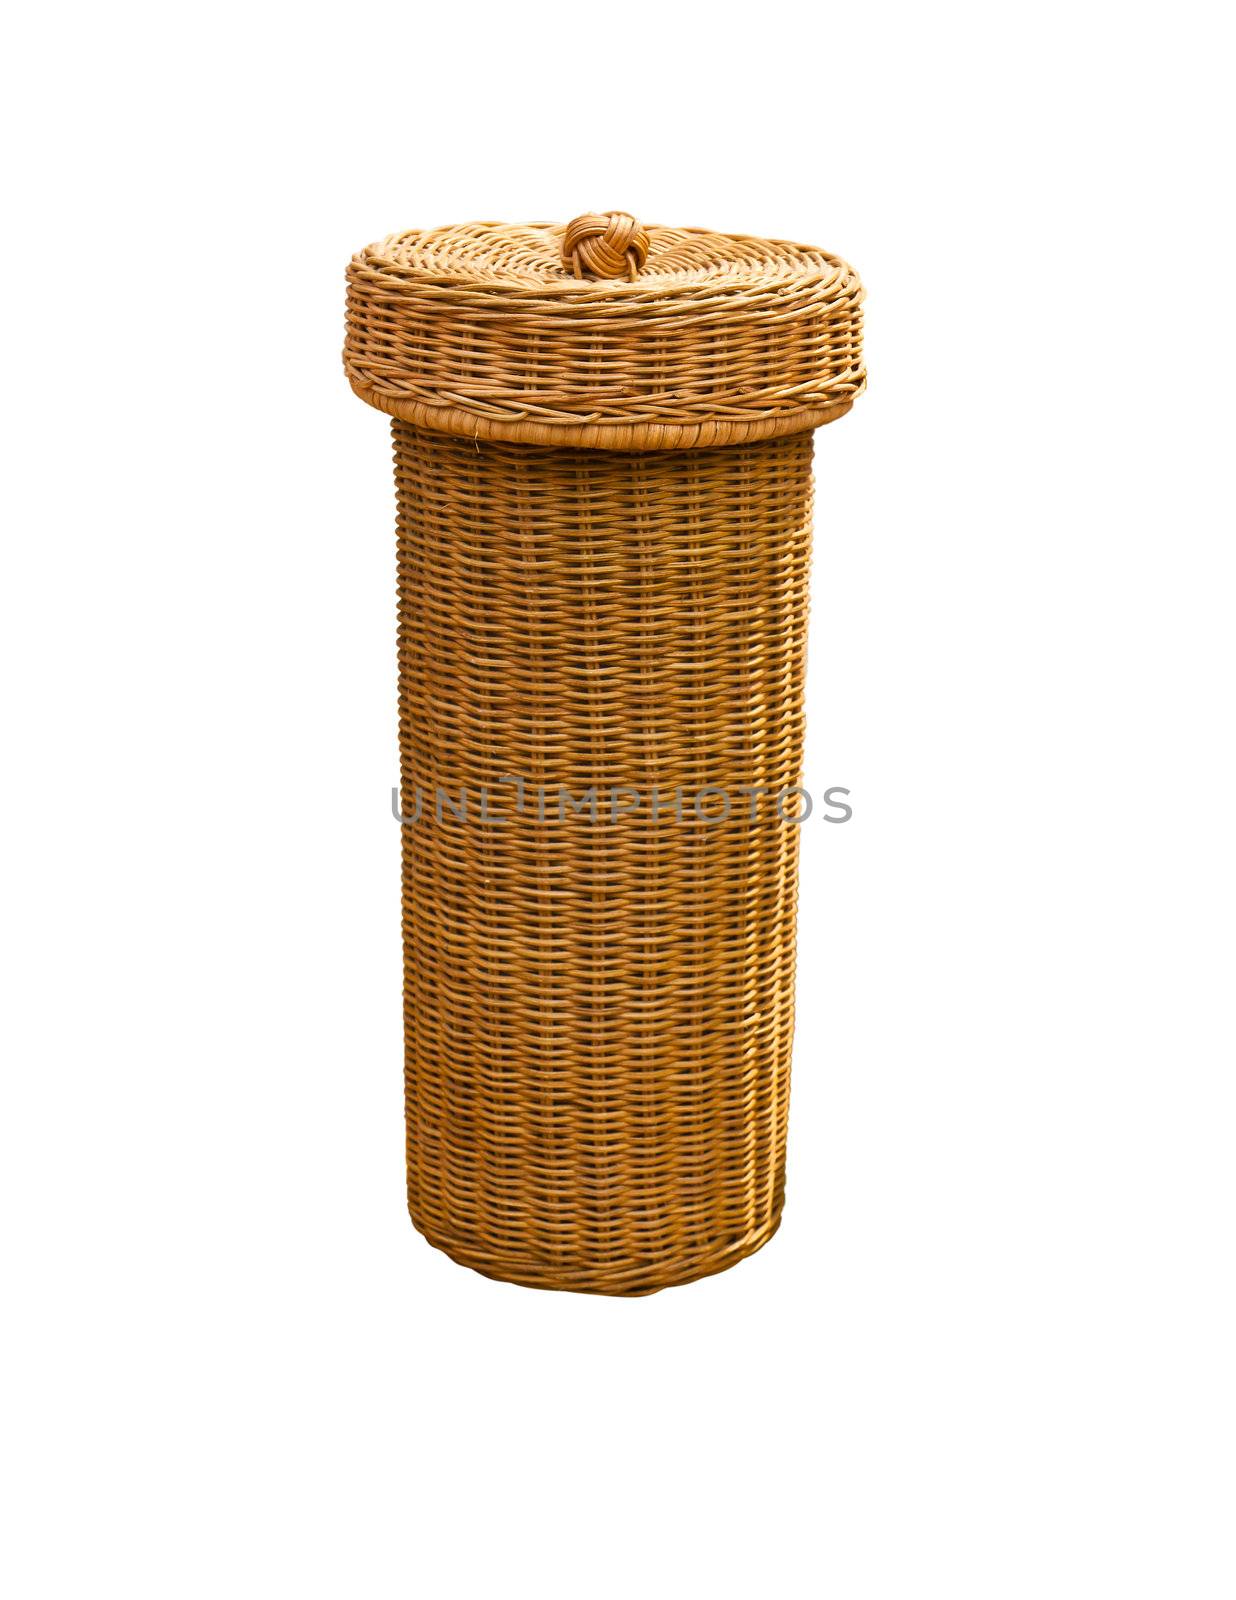 Closed  basket made from rattan on white background